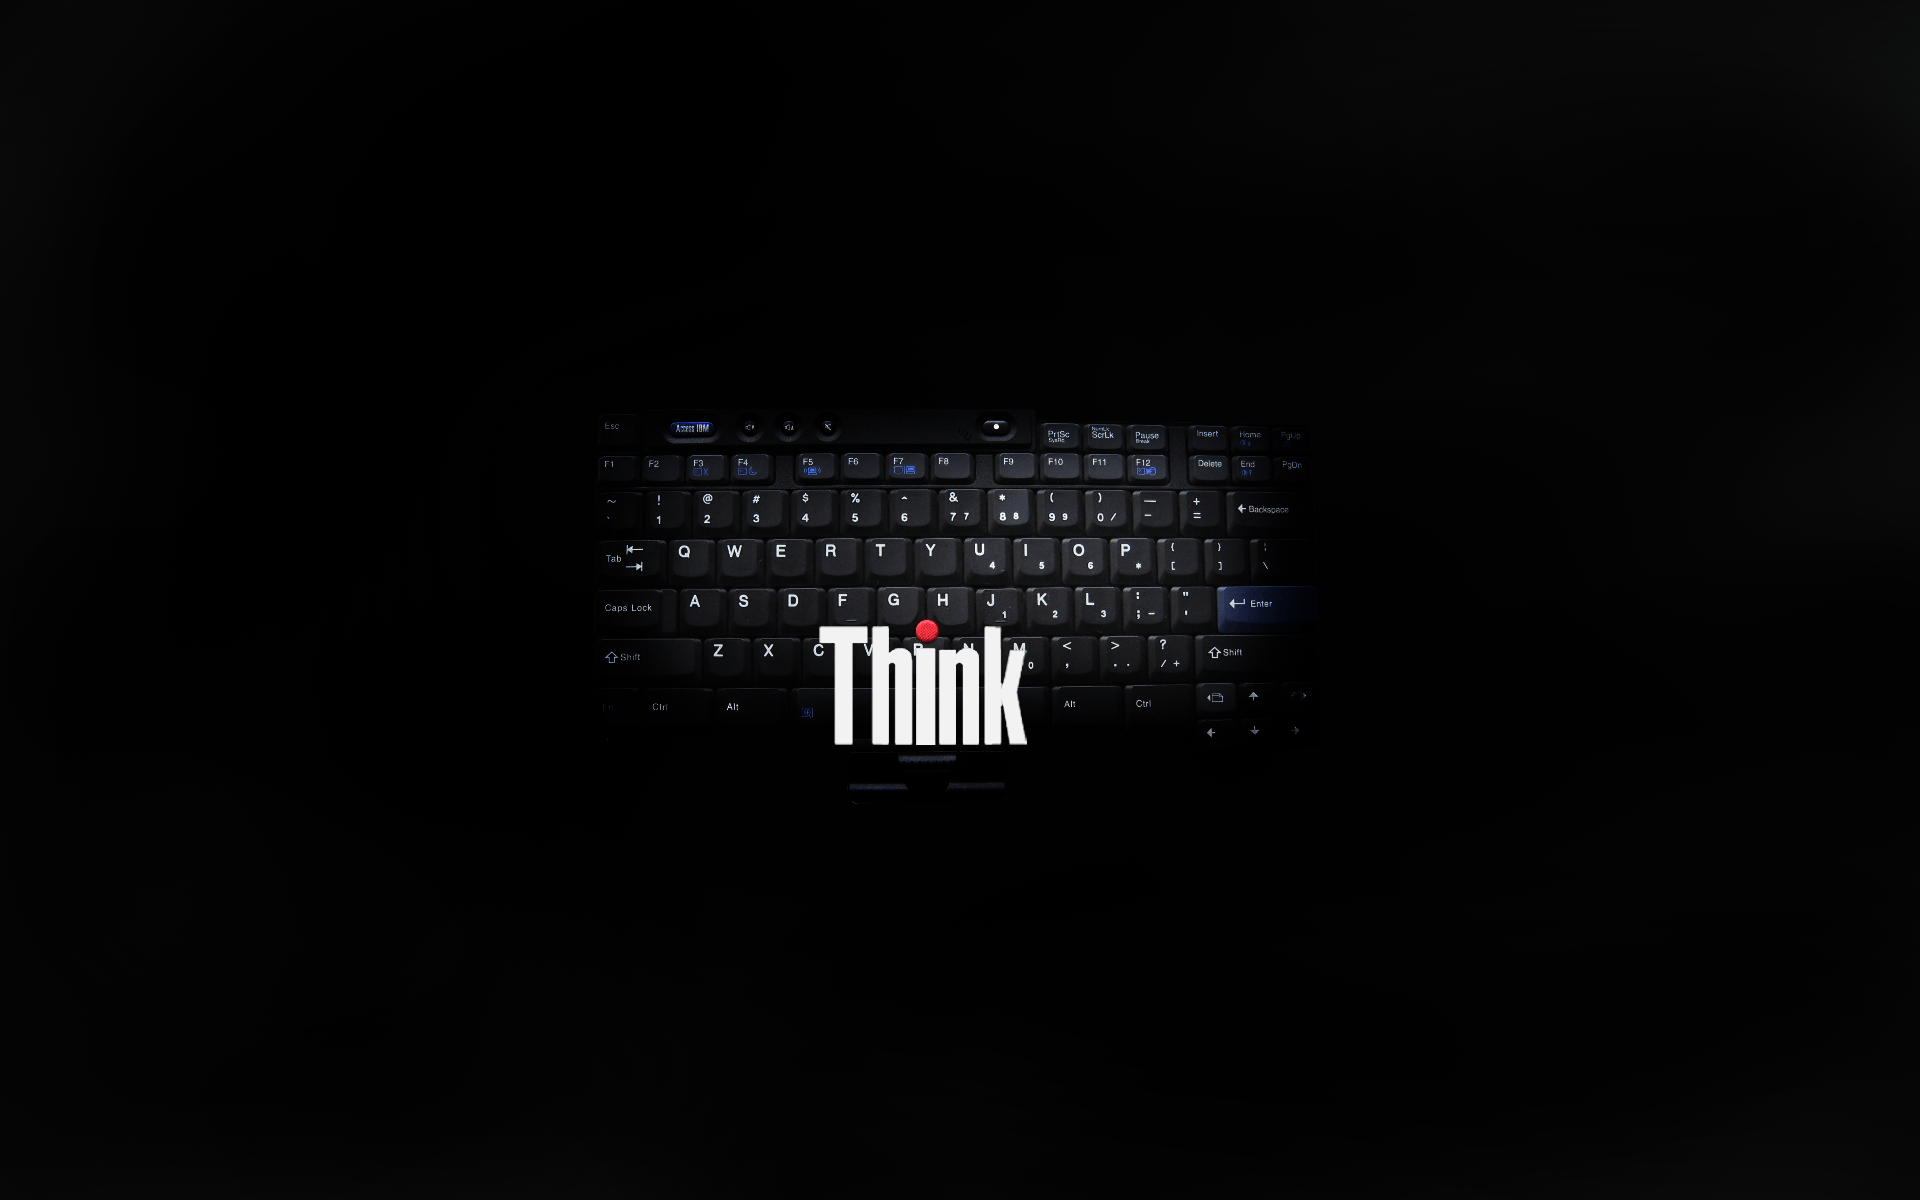 Thinkpad Wallpapers 1600x900 Wallpaper Cave